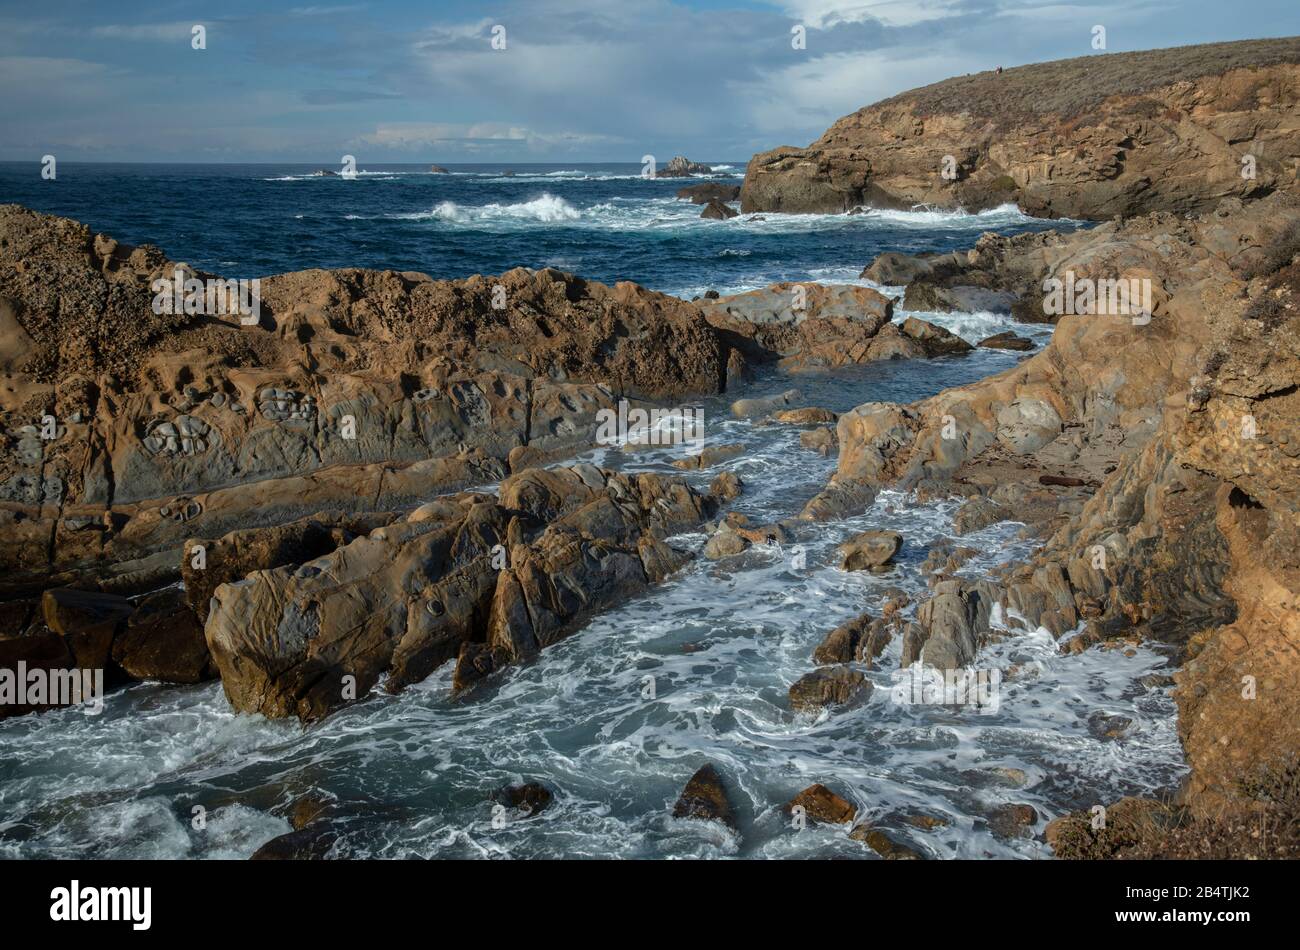 The coast on the southern side of Point lobos state reserve, with the Pacific Ocean. California. Stock Photo